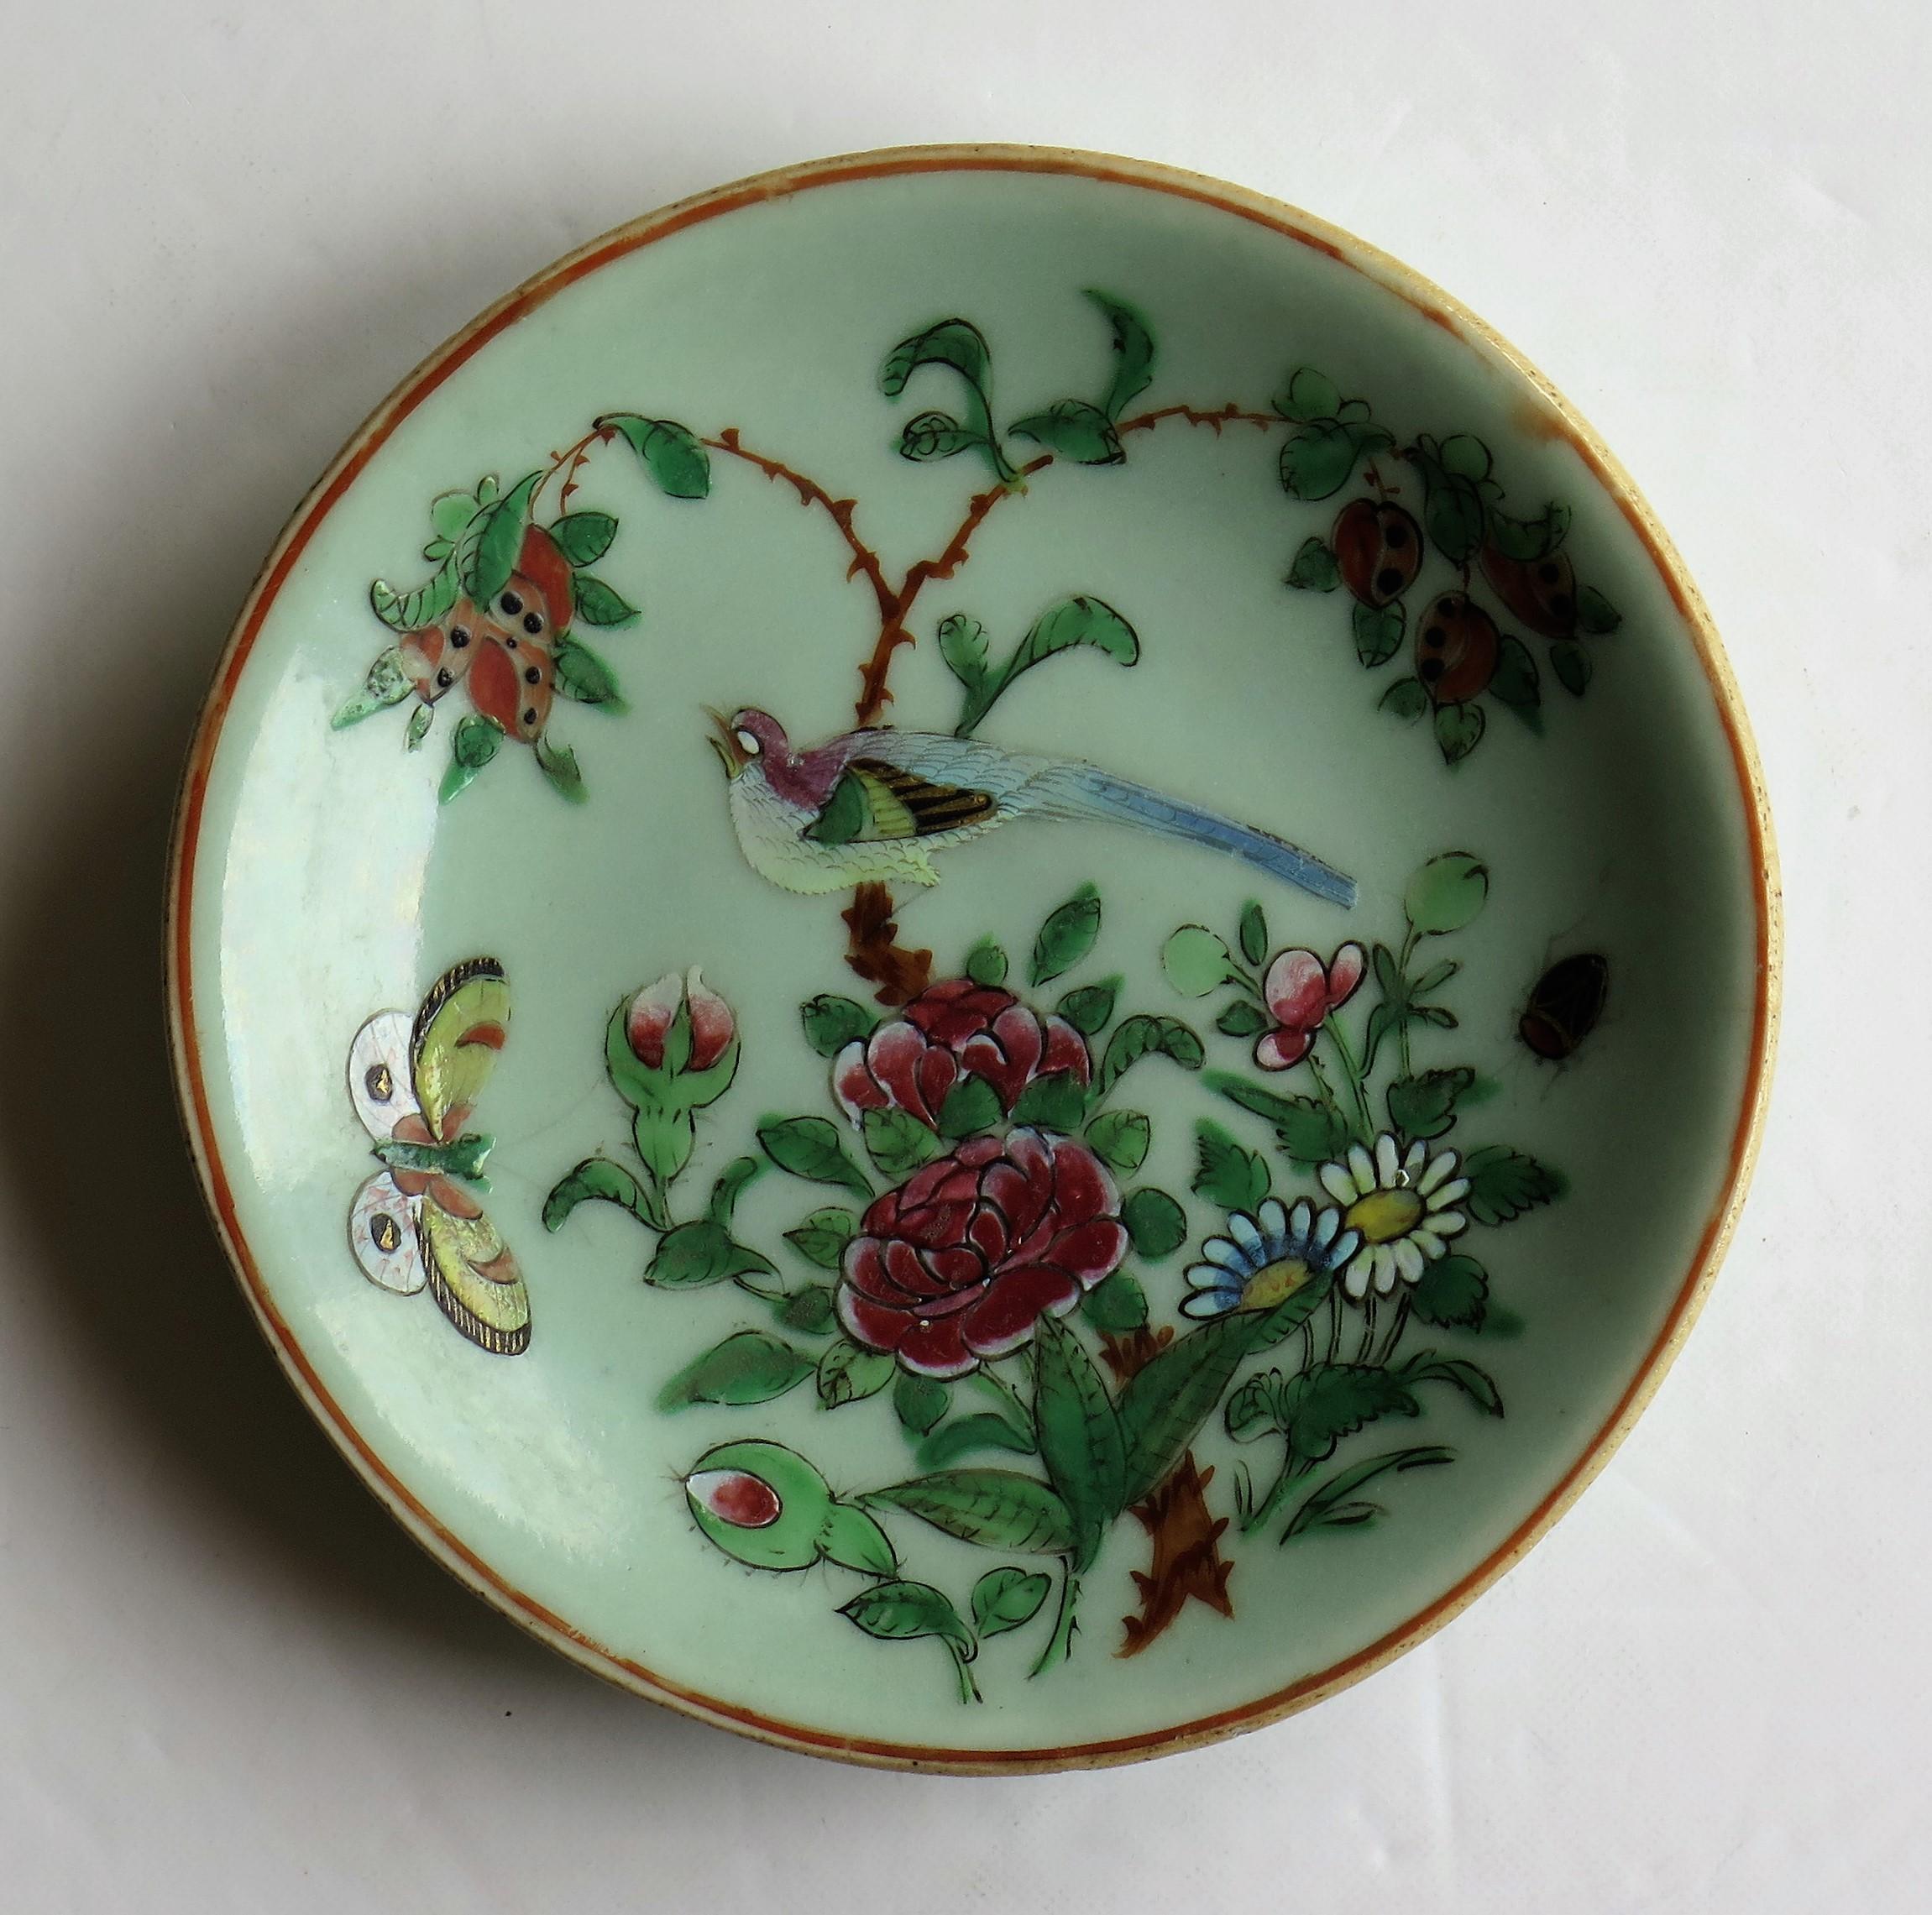 This is a good porcelain Chinese Export, (Canton) small plate or dish with a celadon glaze, hand painted in the Famille Rose palette, which we date to the early 19th century, circa 1820 of the Qing dynasty.

The plate has a light green, Celadon